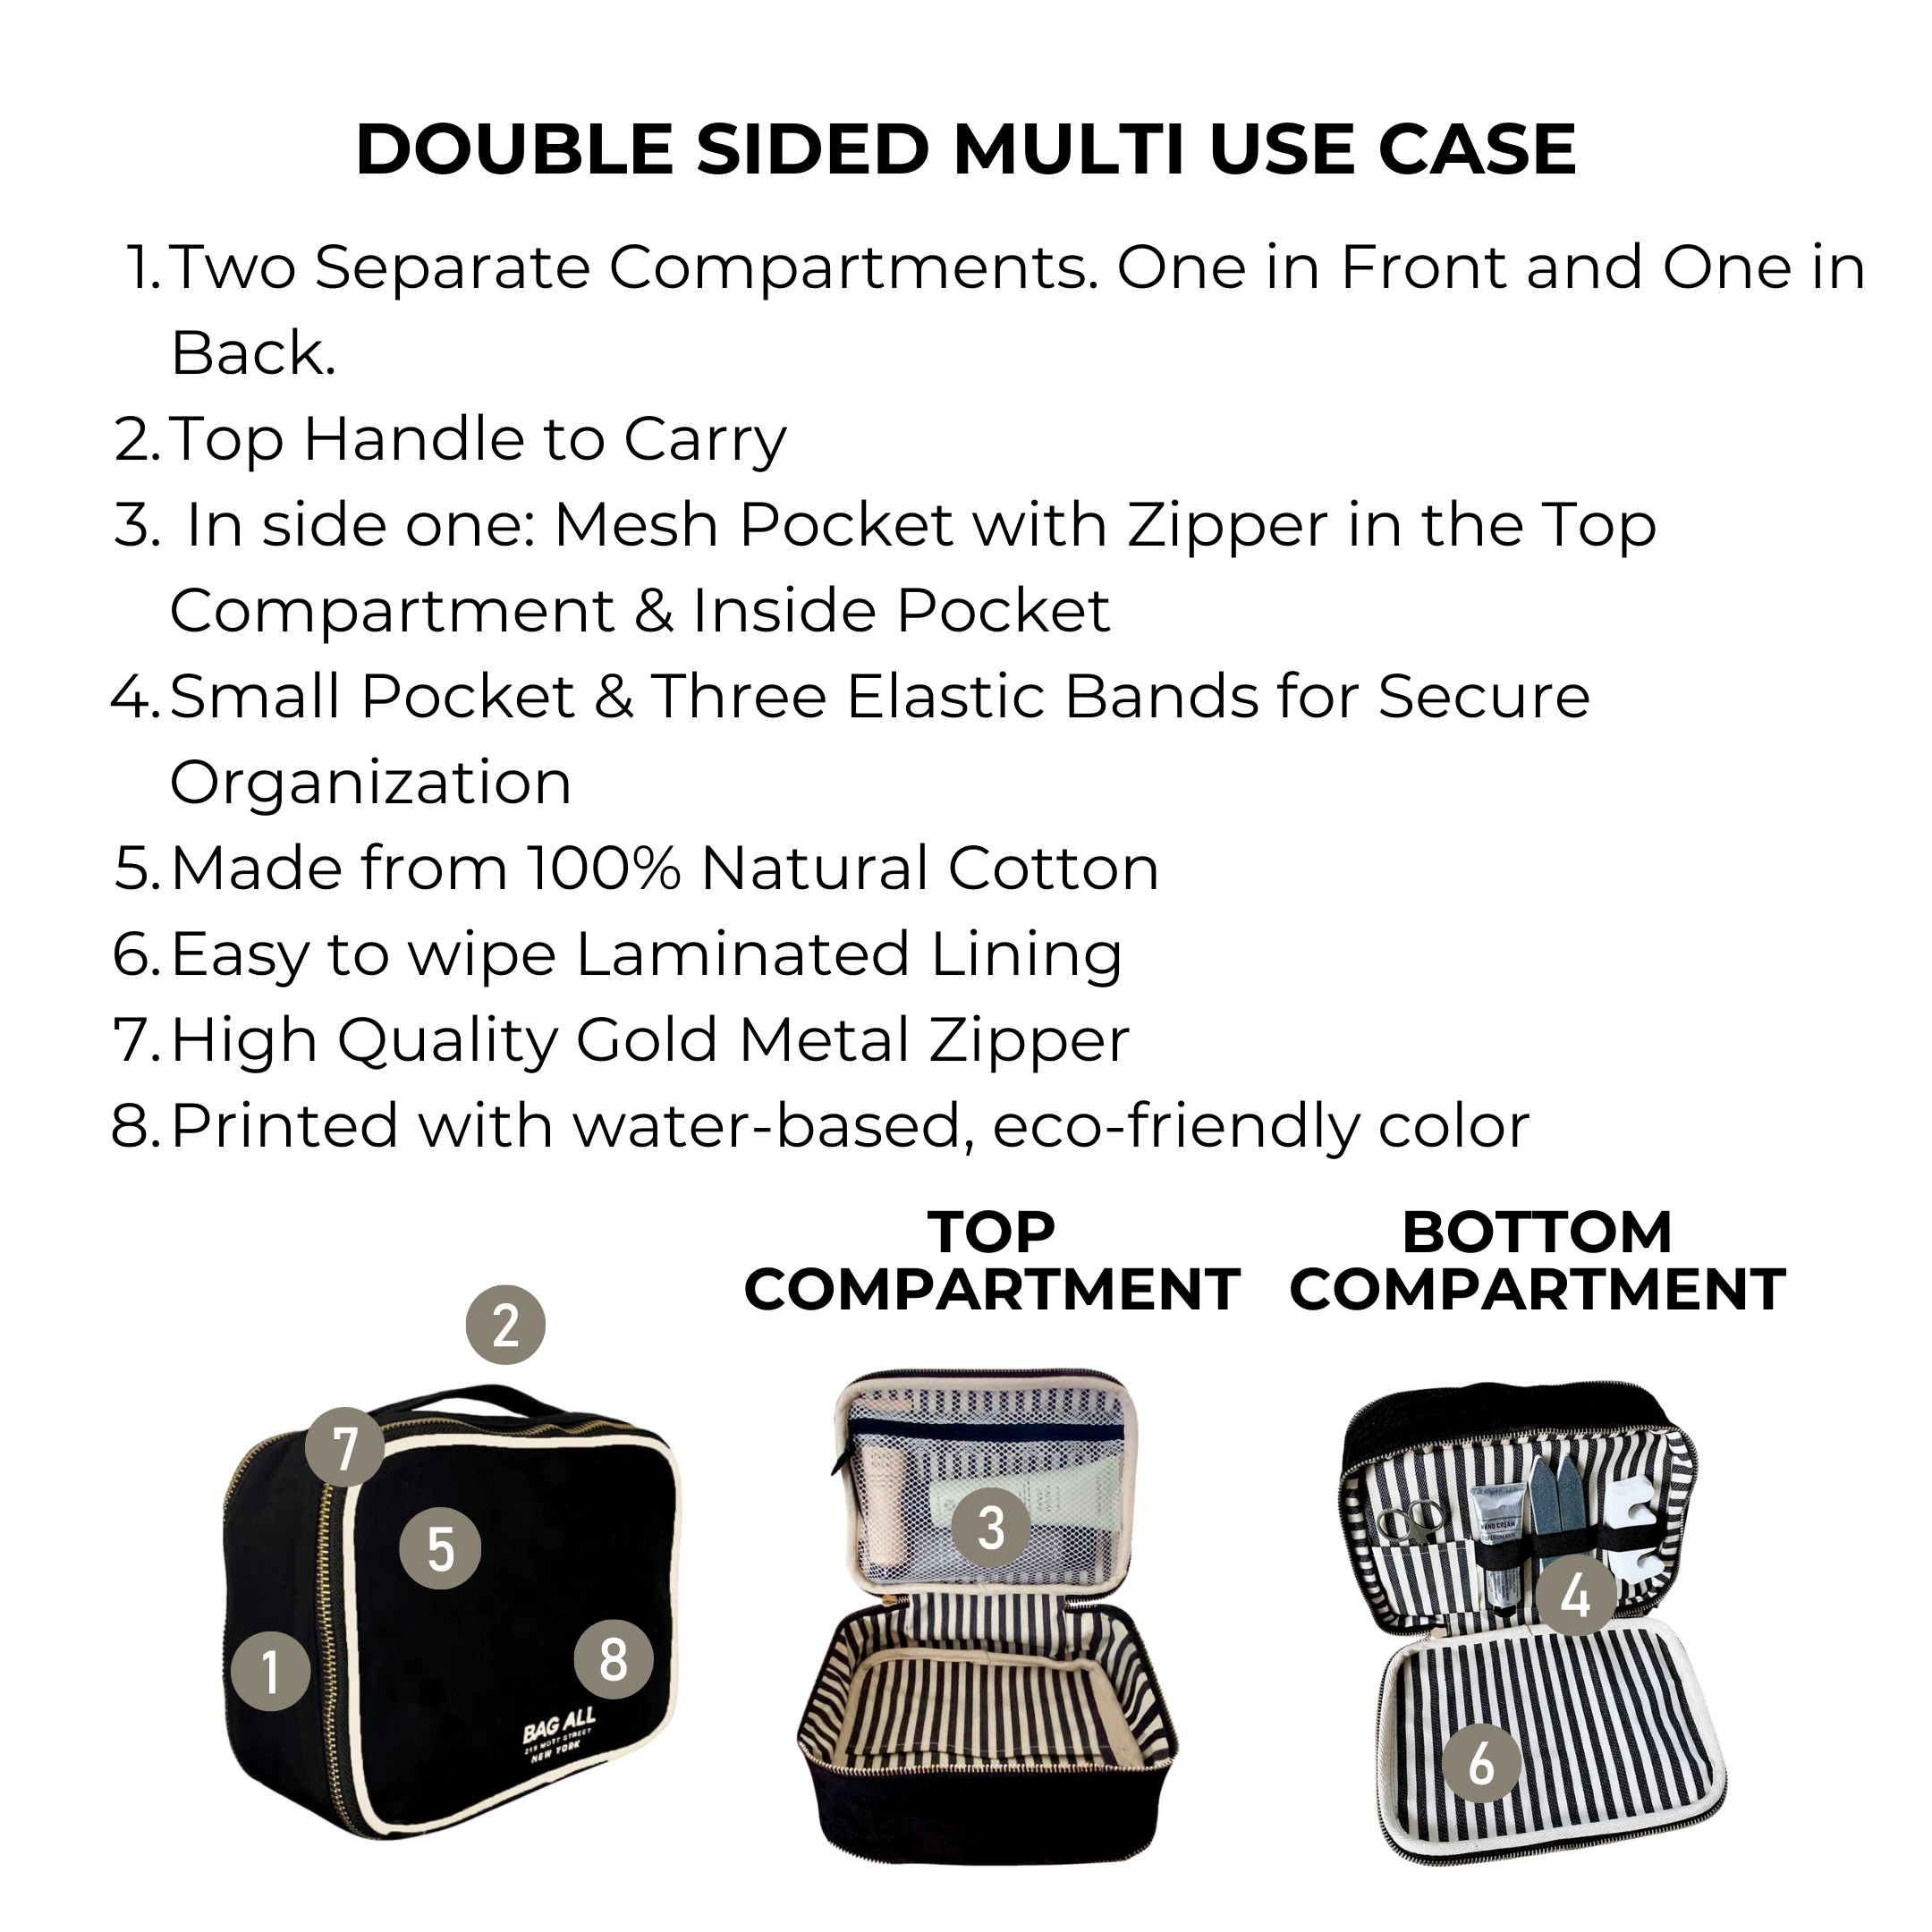 Double Sided Multi Use Case, Black | Bag-all